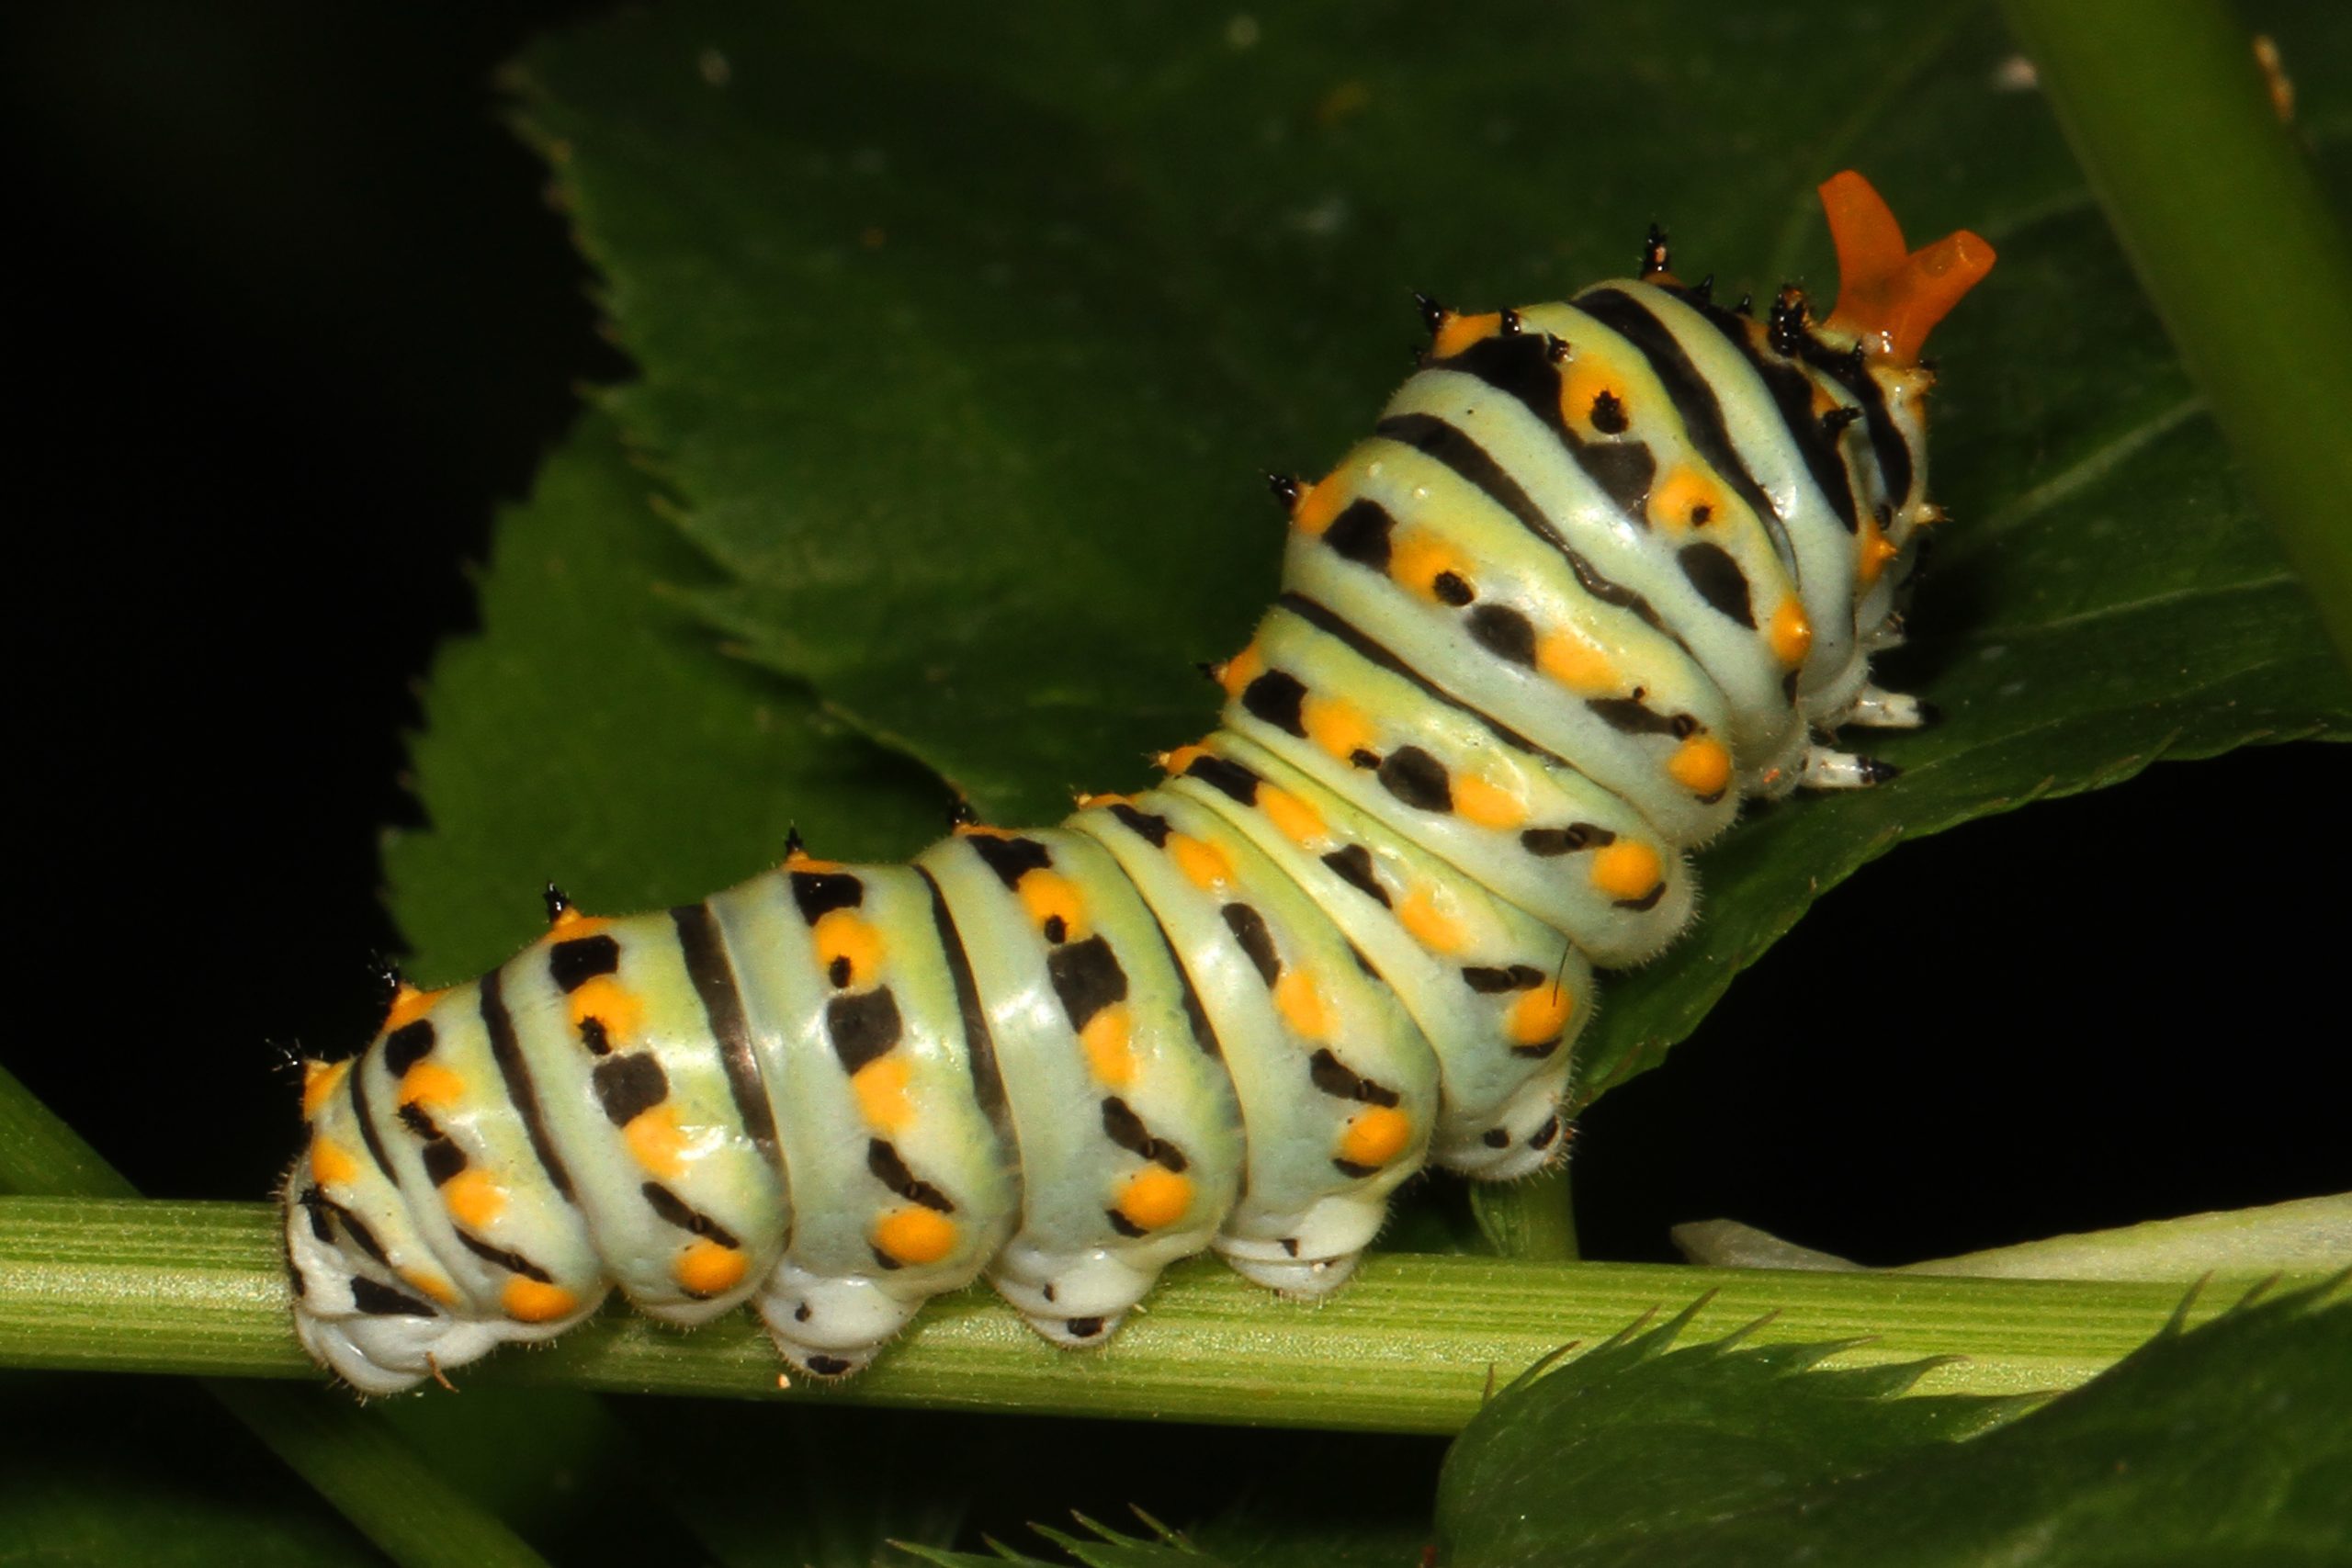 a close up of a caterpillar on a plant